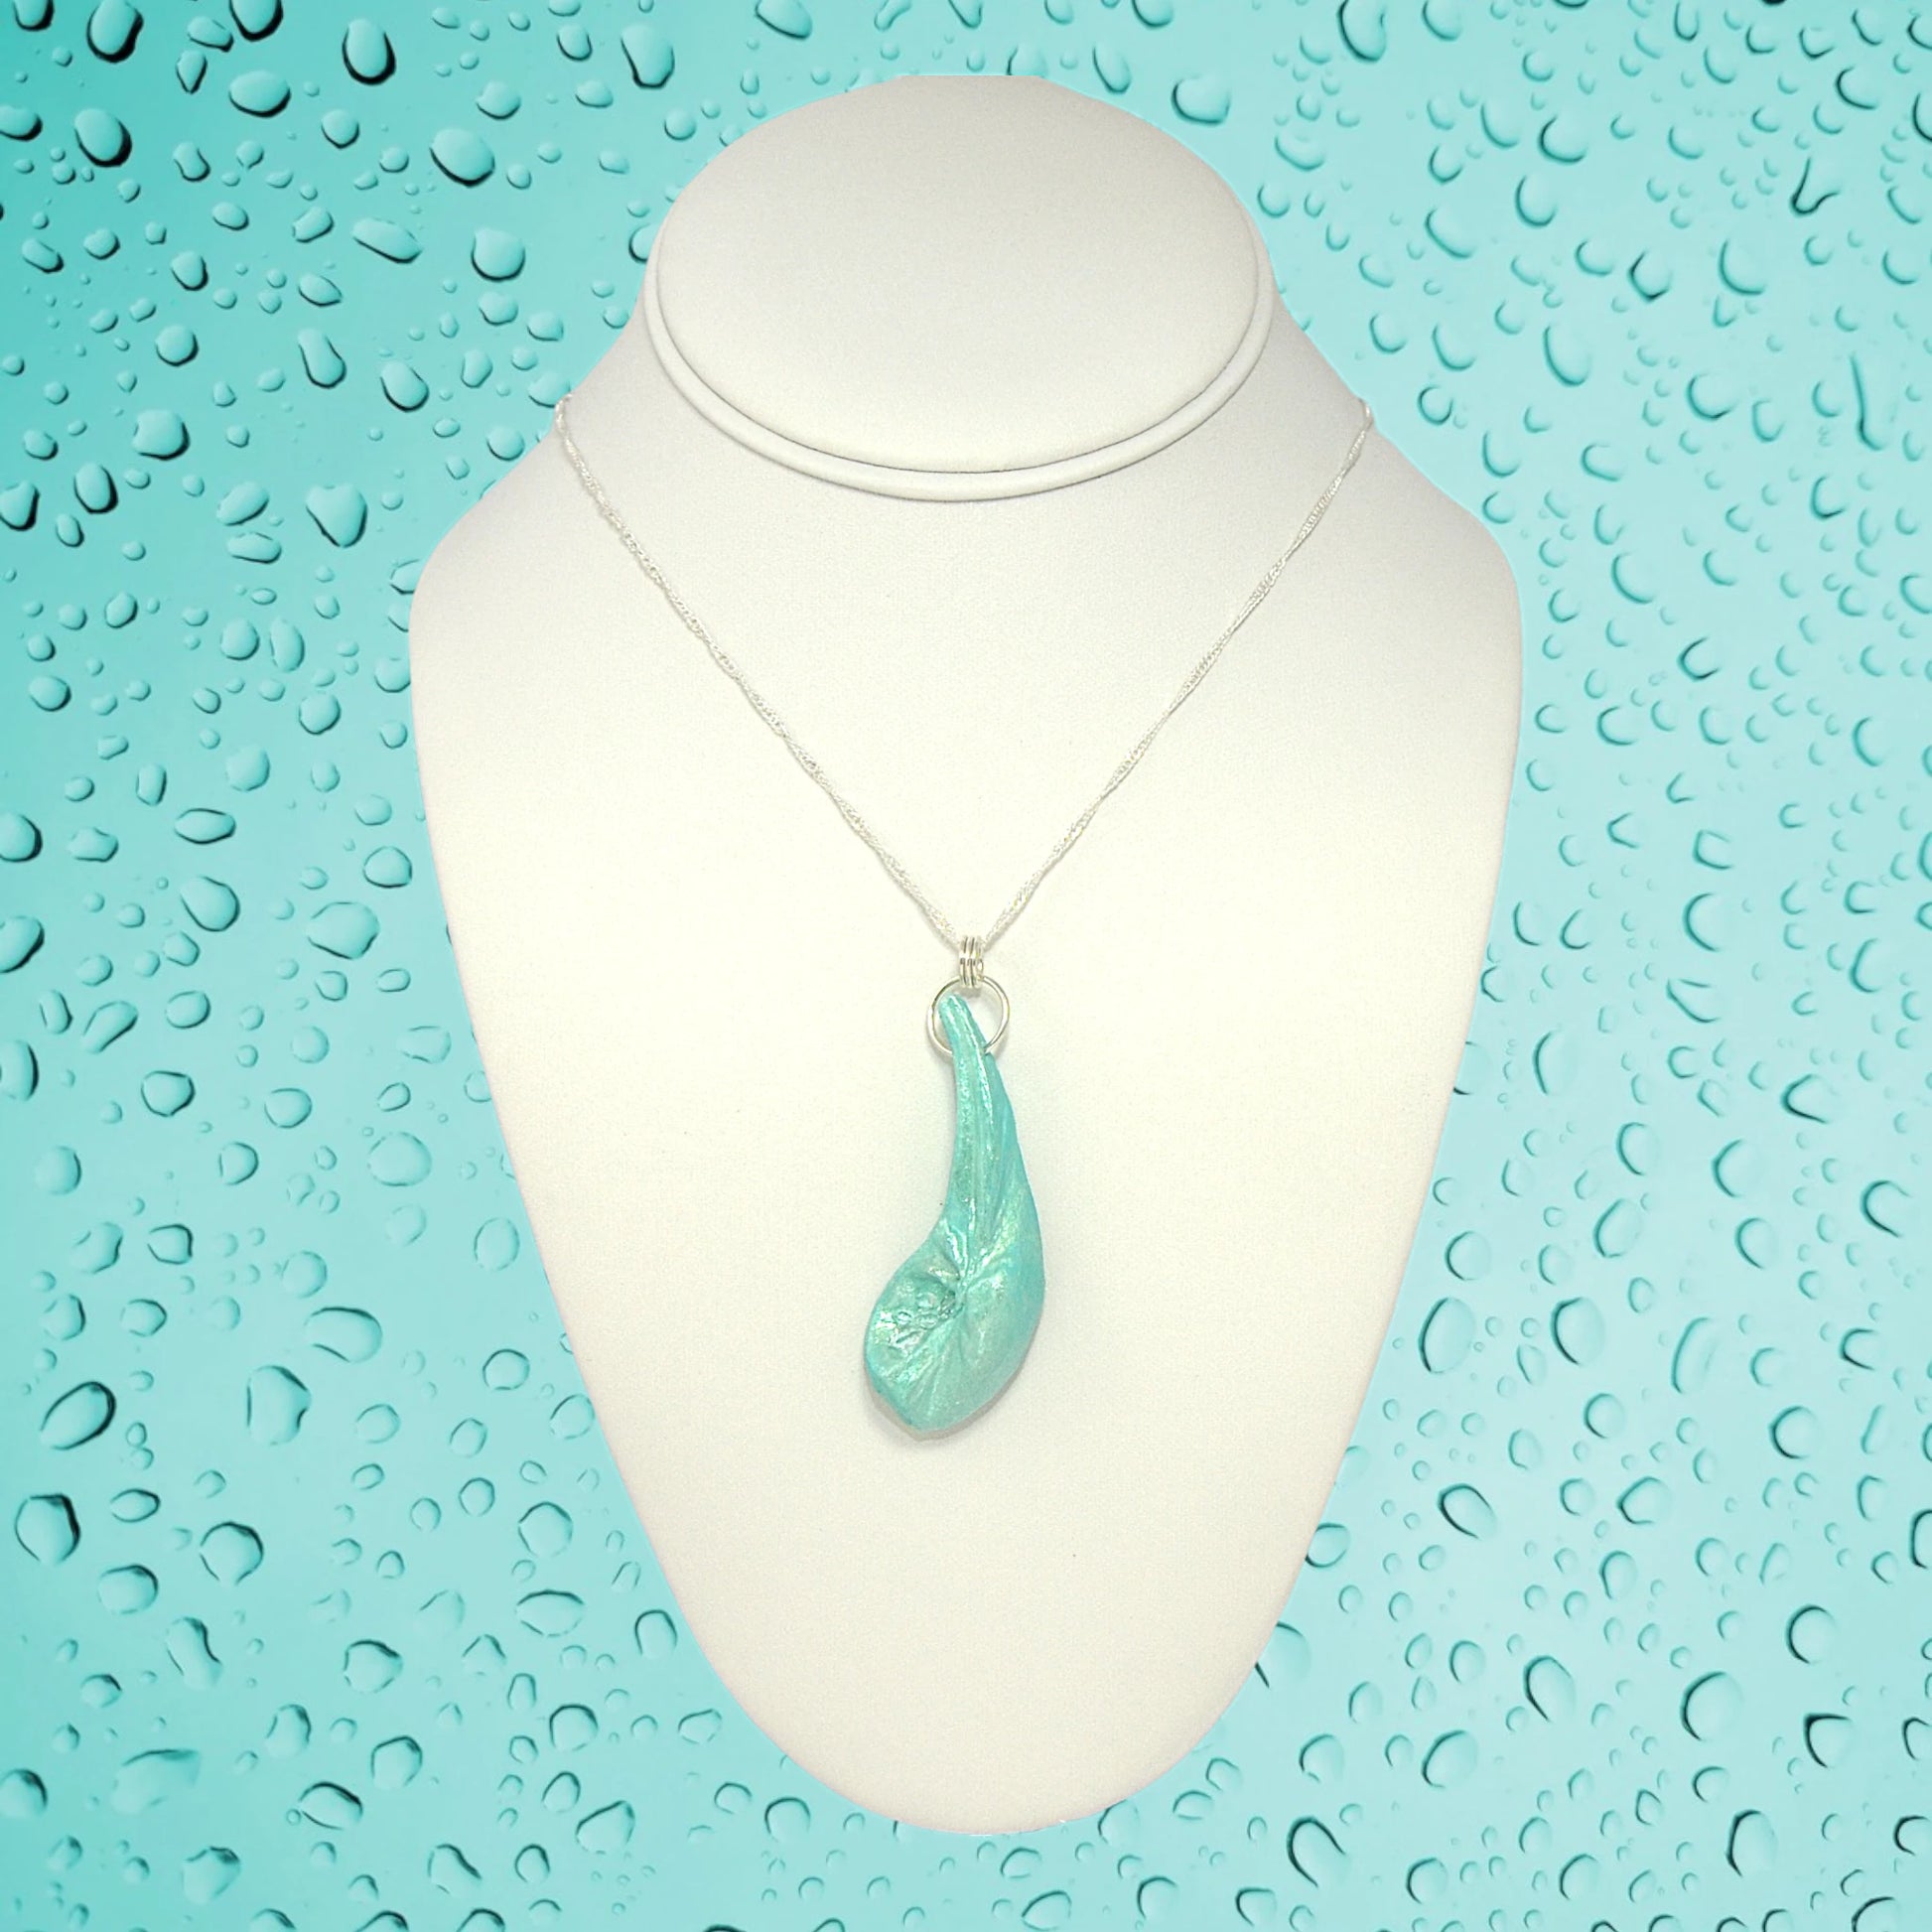 The Cascadia Pendant created with a natural seashell from the beaches of Vancouver Island.  The seashell is turquoise and has high quality herkimer diamonds. The pendant is hanging from a chain on a white necklace displayer.  The background is a light turquoise colour to compliment the colour of the pendant. There are rain drops on the turquoise background.